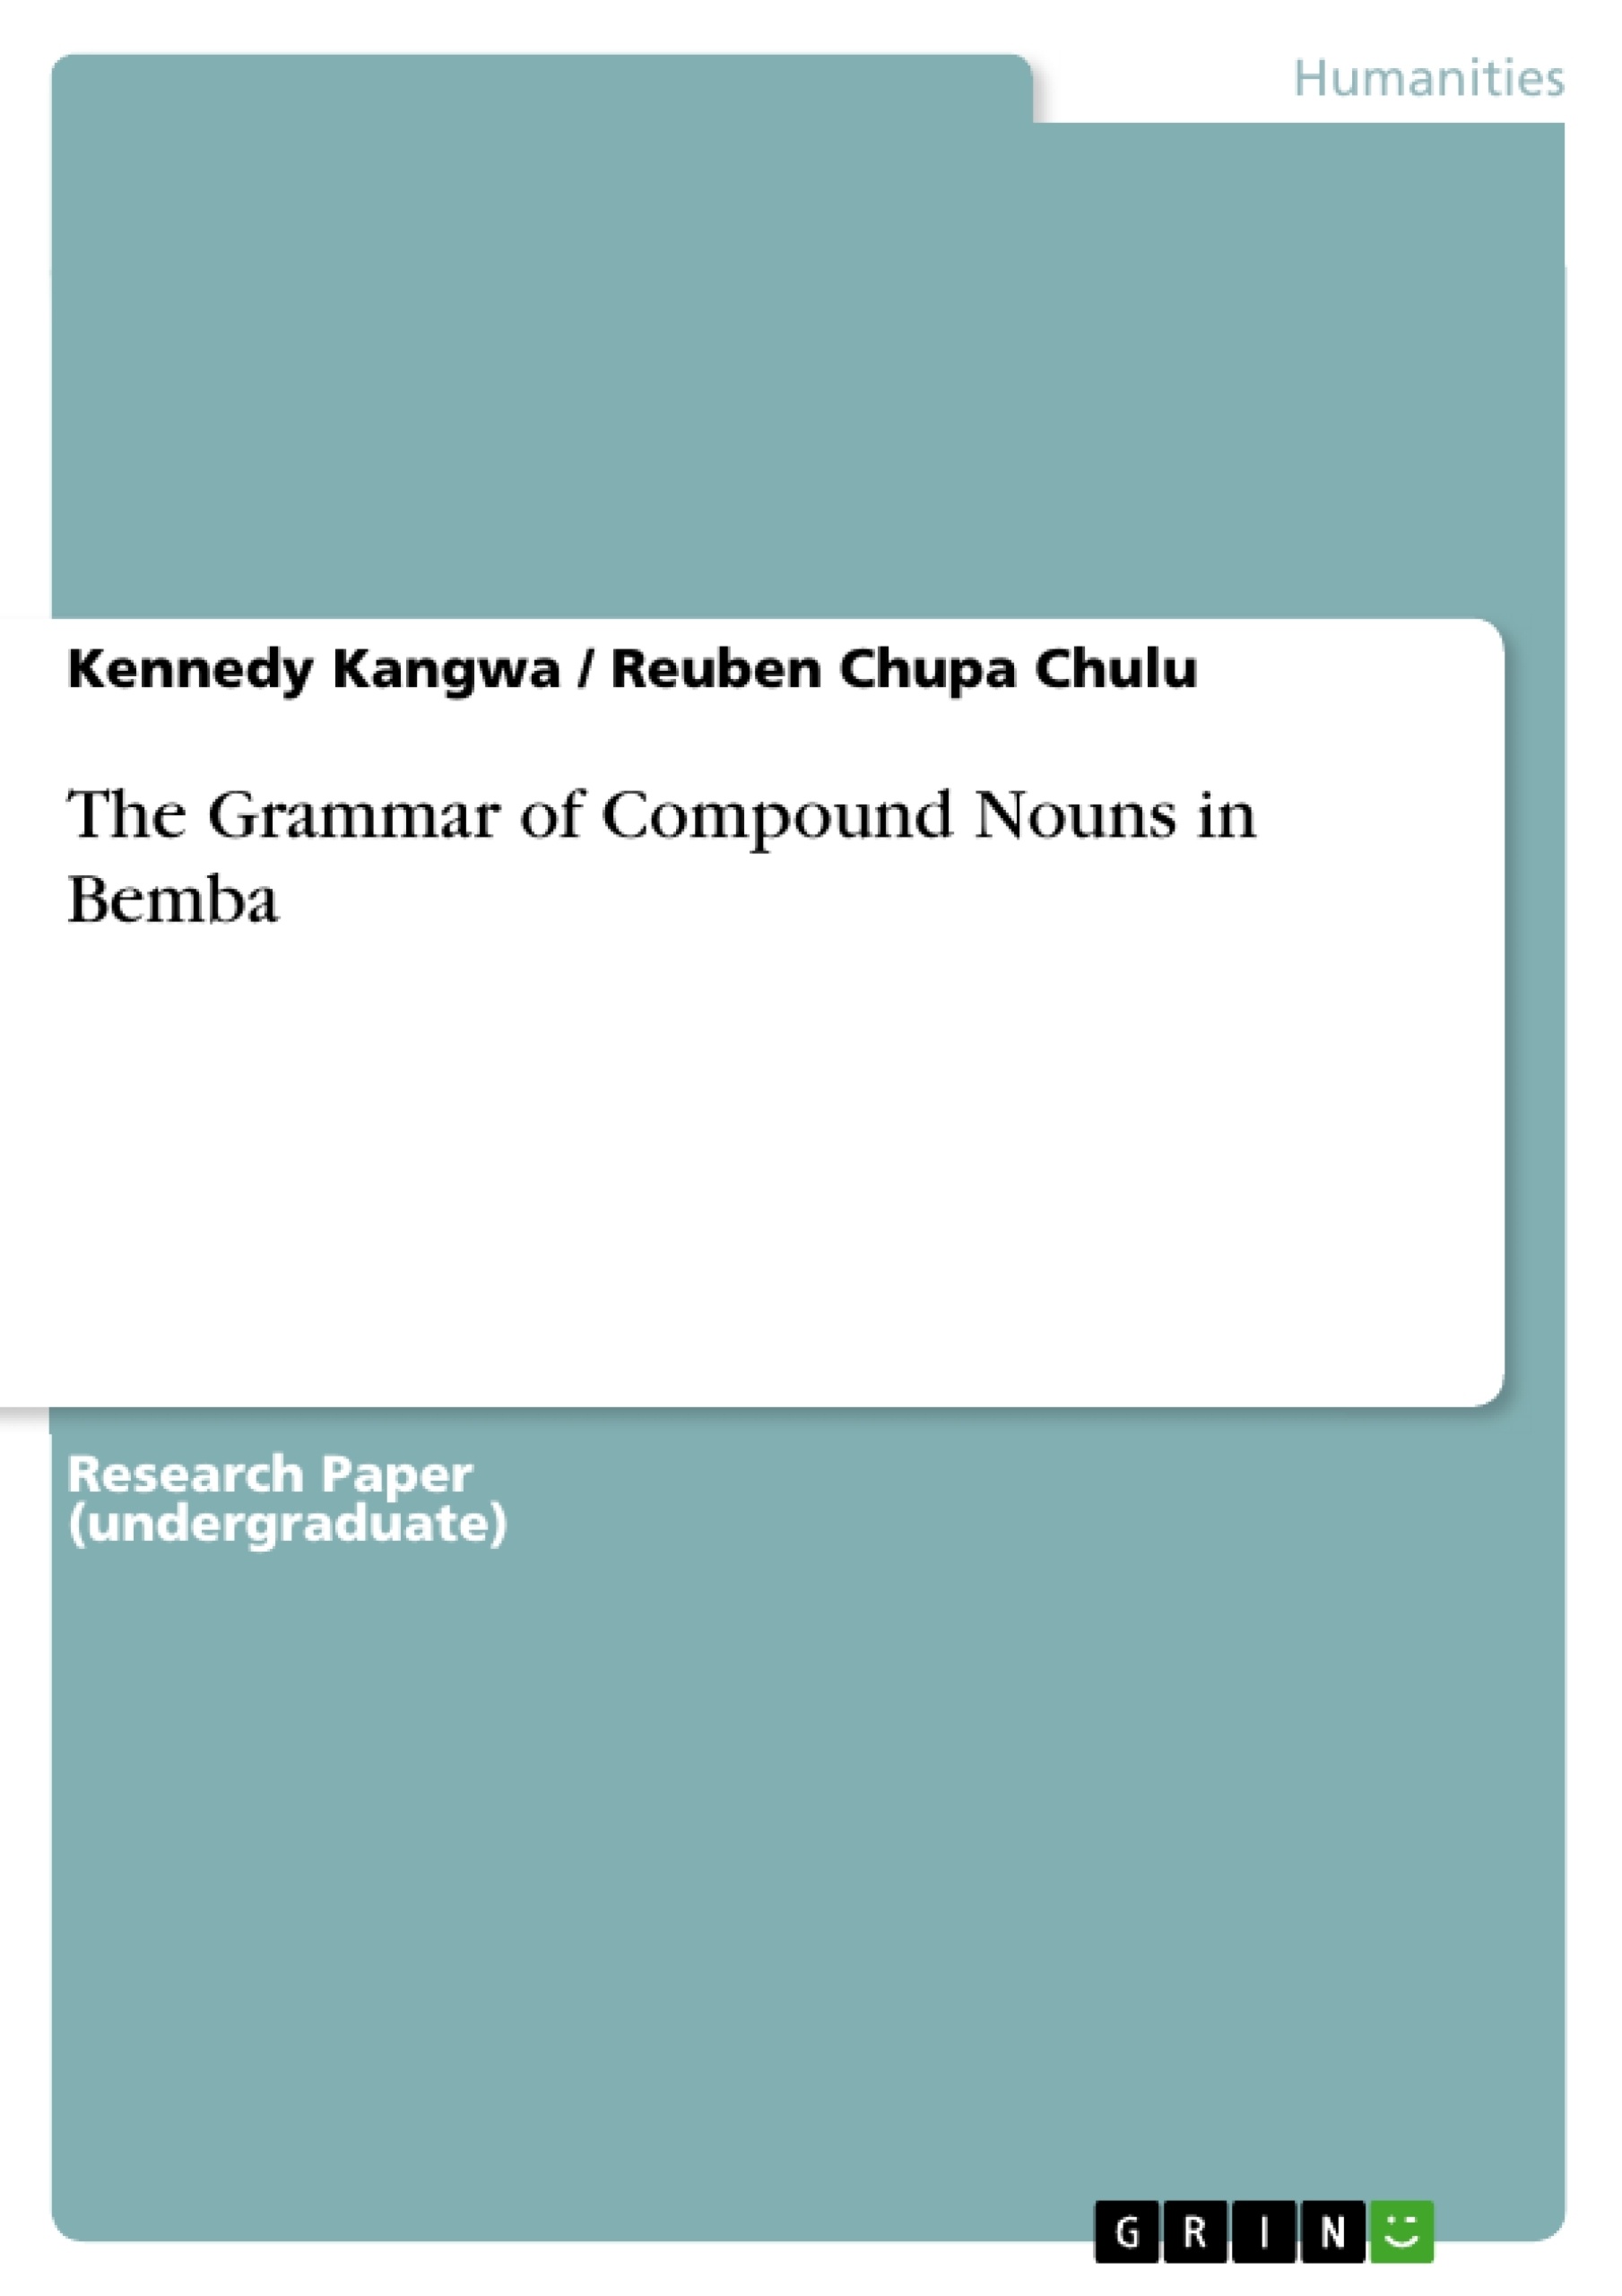 Title: The Grammar of Compound Nouns in Bemba